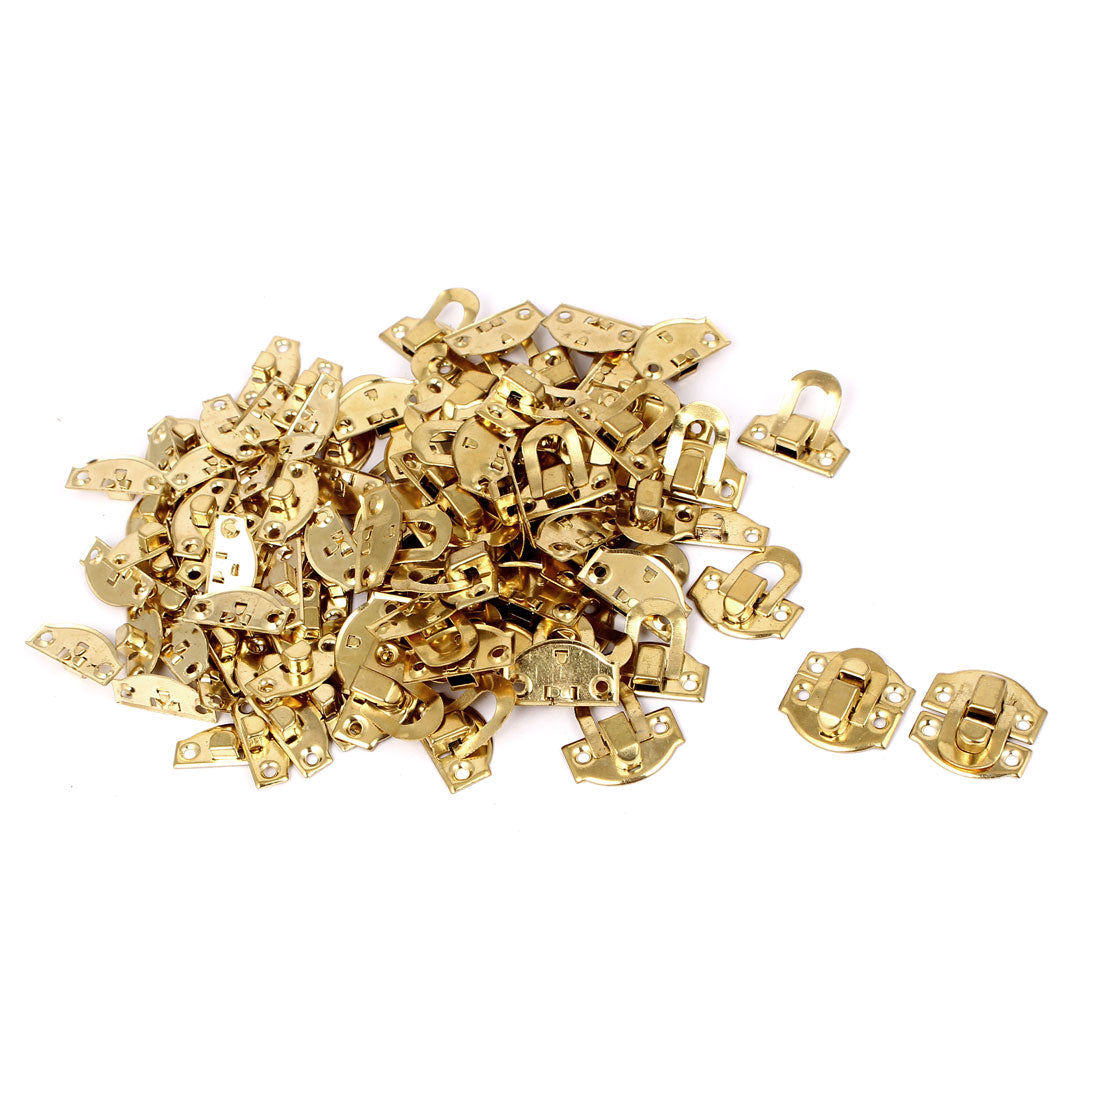 uxcell Uxcell Suitcase Case Chest Box Decorative Lock Hasp Metal Toggle Latch Gold Tone 50pcs